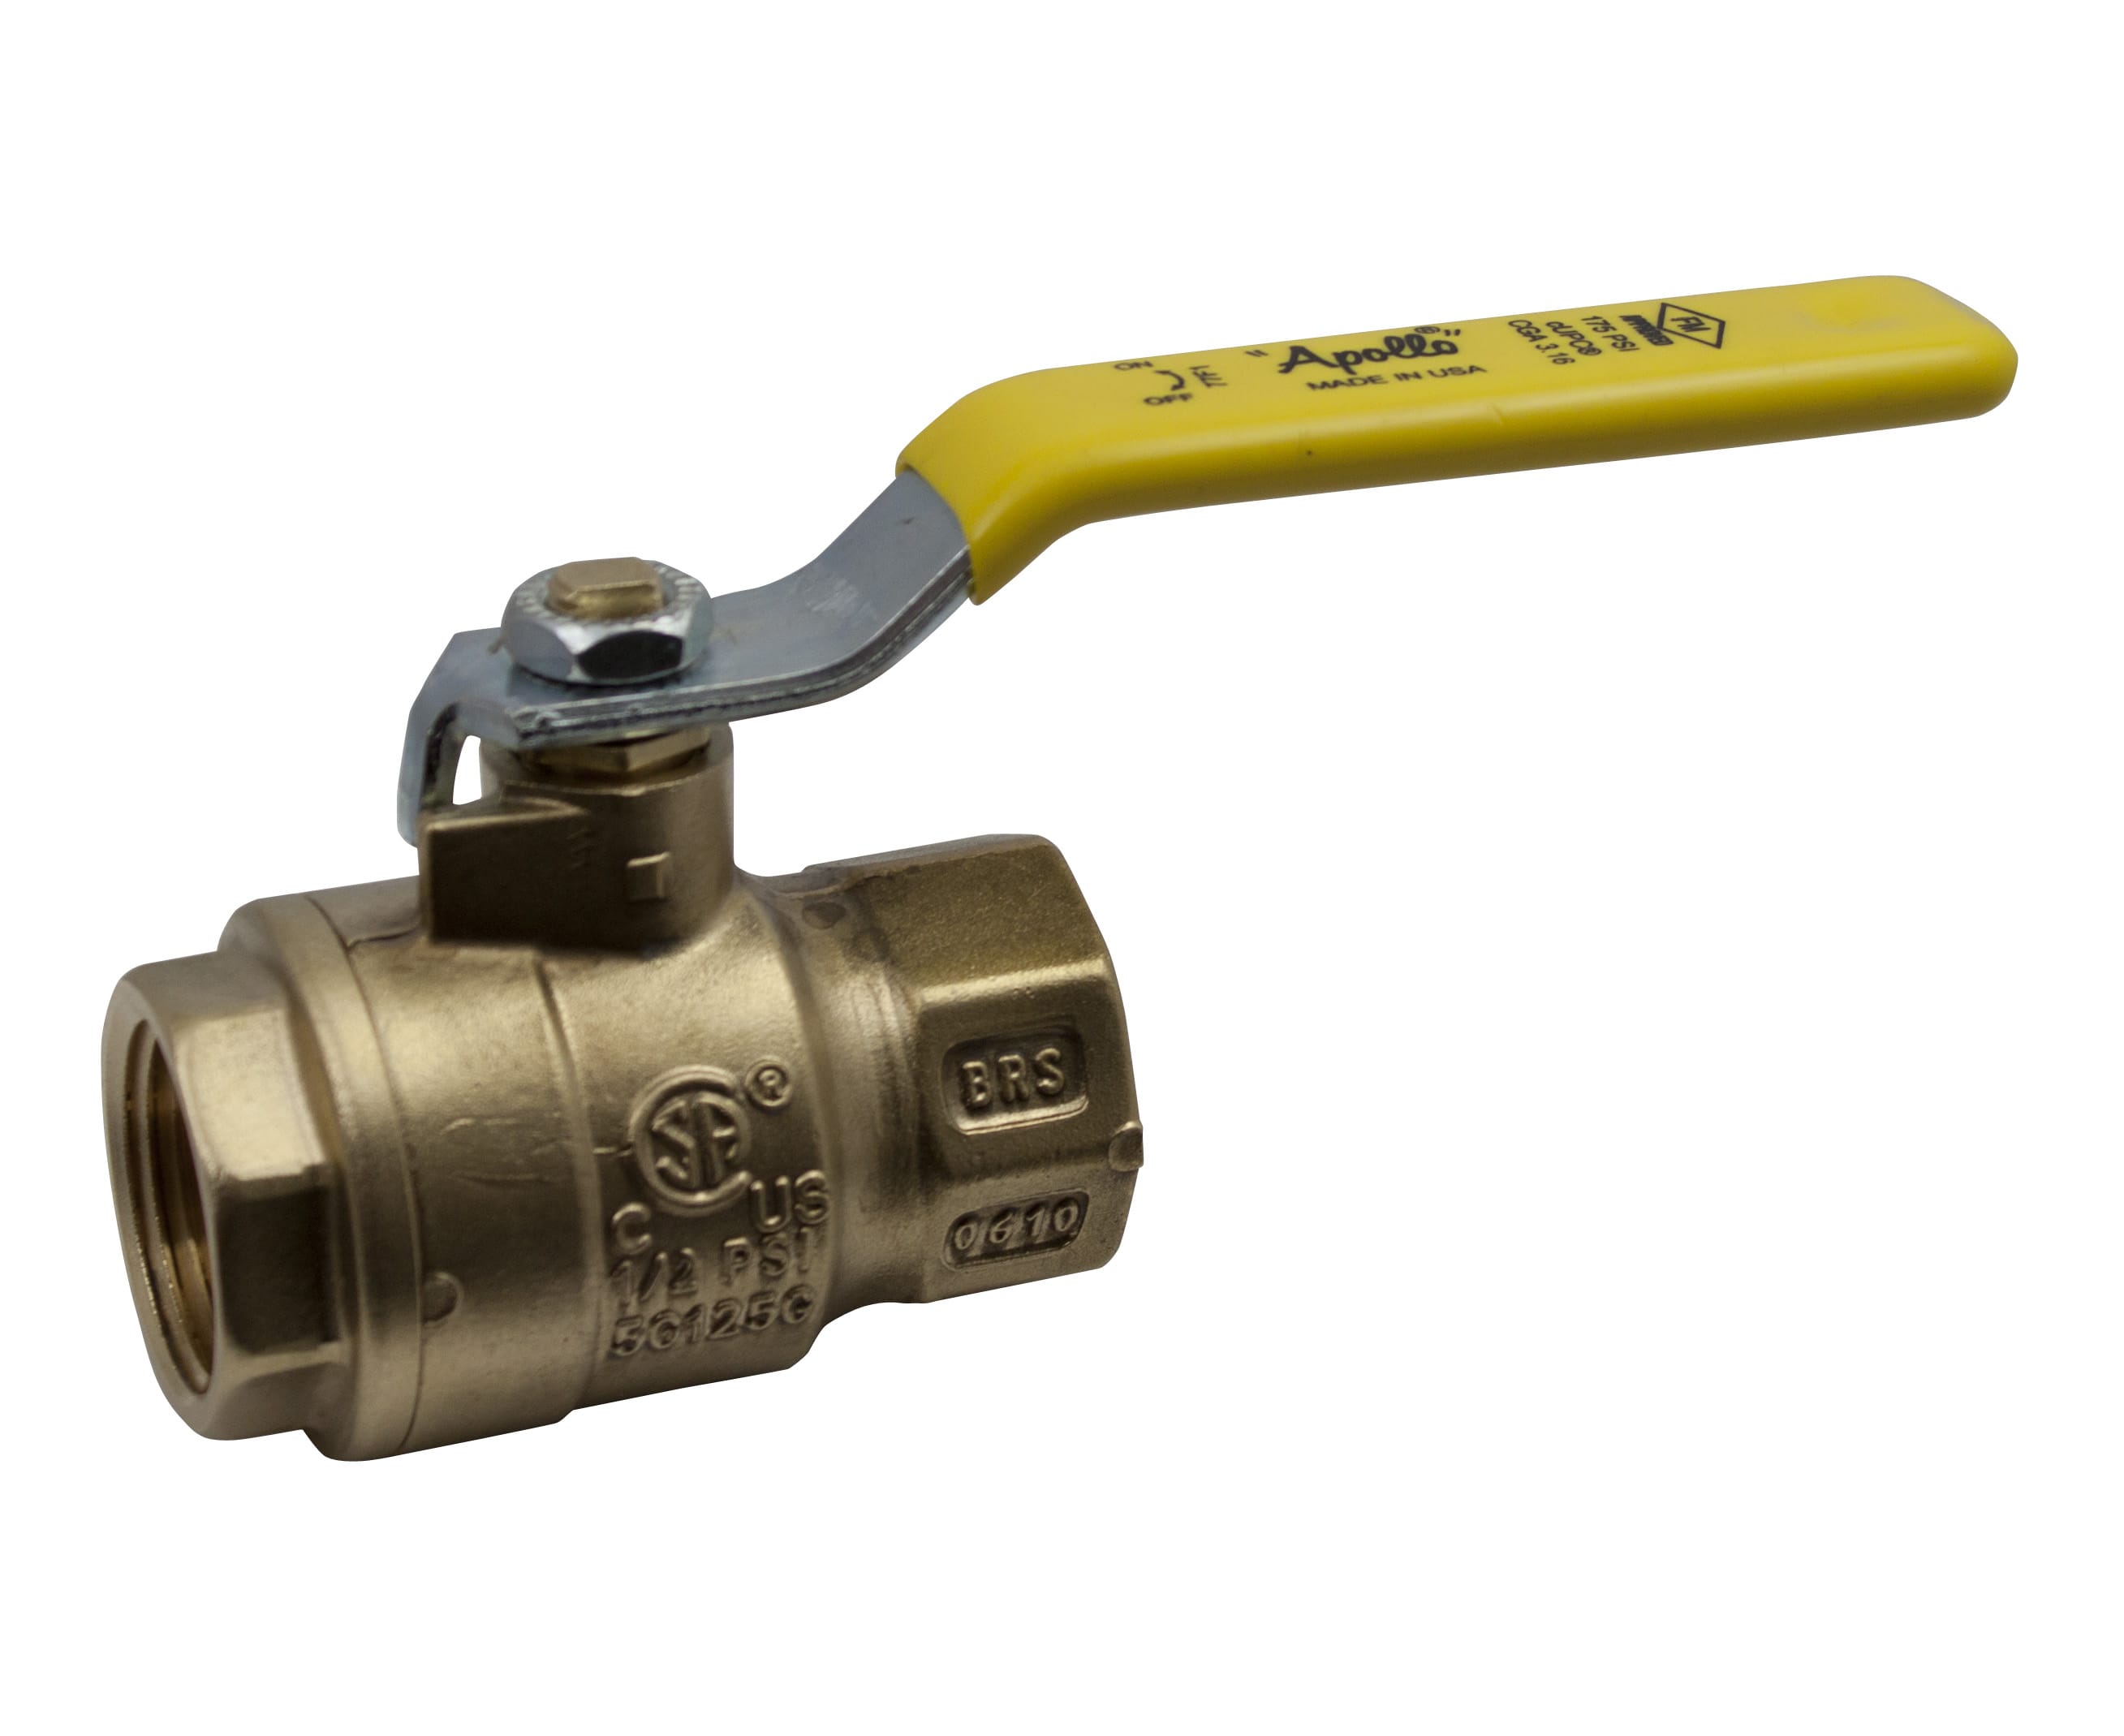 Ball Valve, 1/4 Inch NPT, Full Port, Forged Brass, SS, Ball And Stem